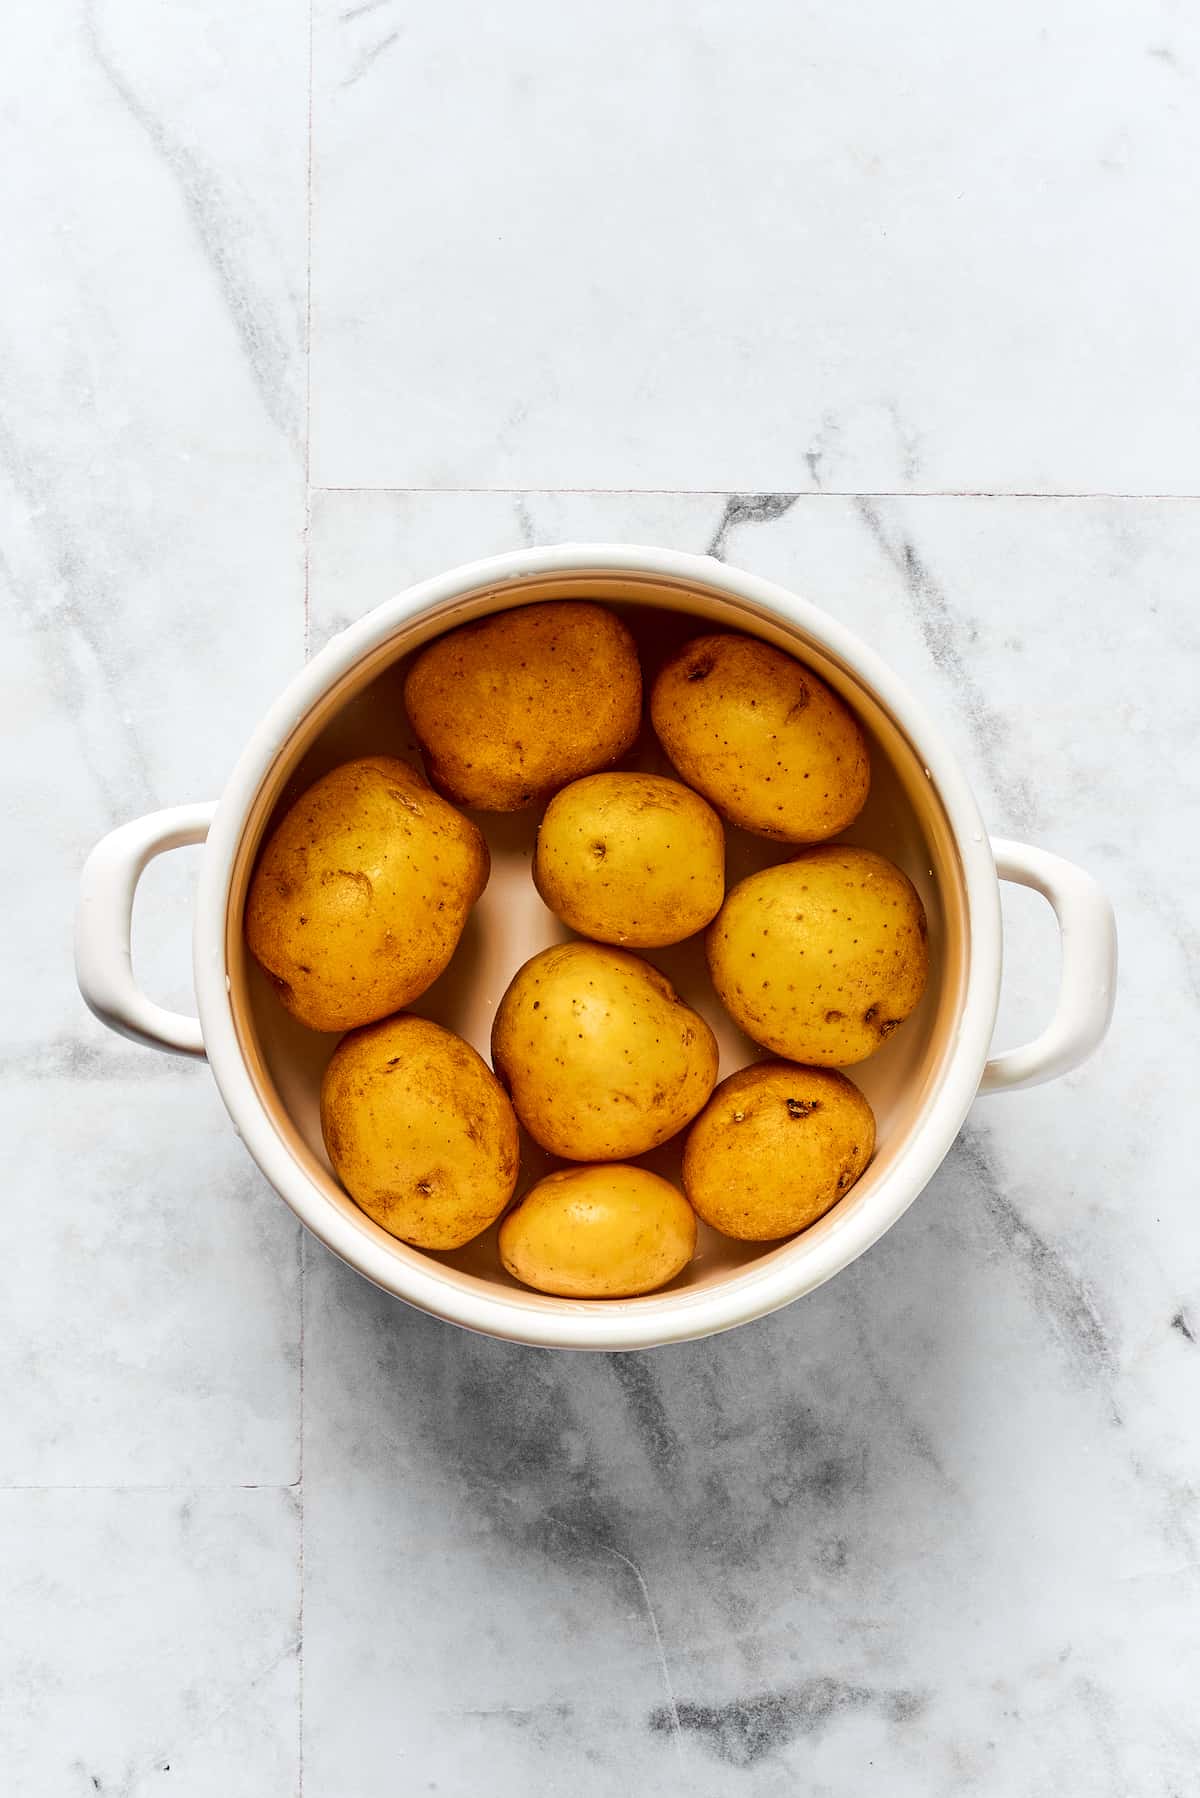 Potatoes cooking in a pot.